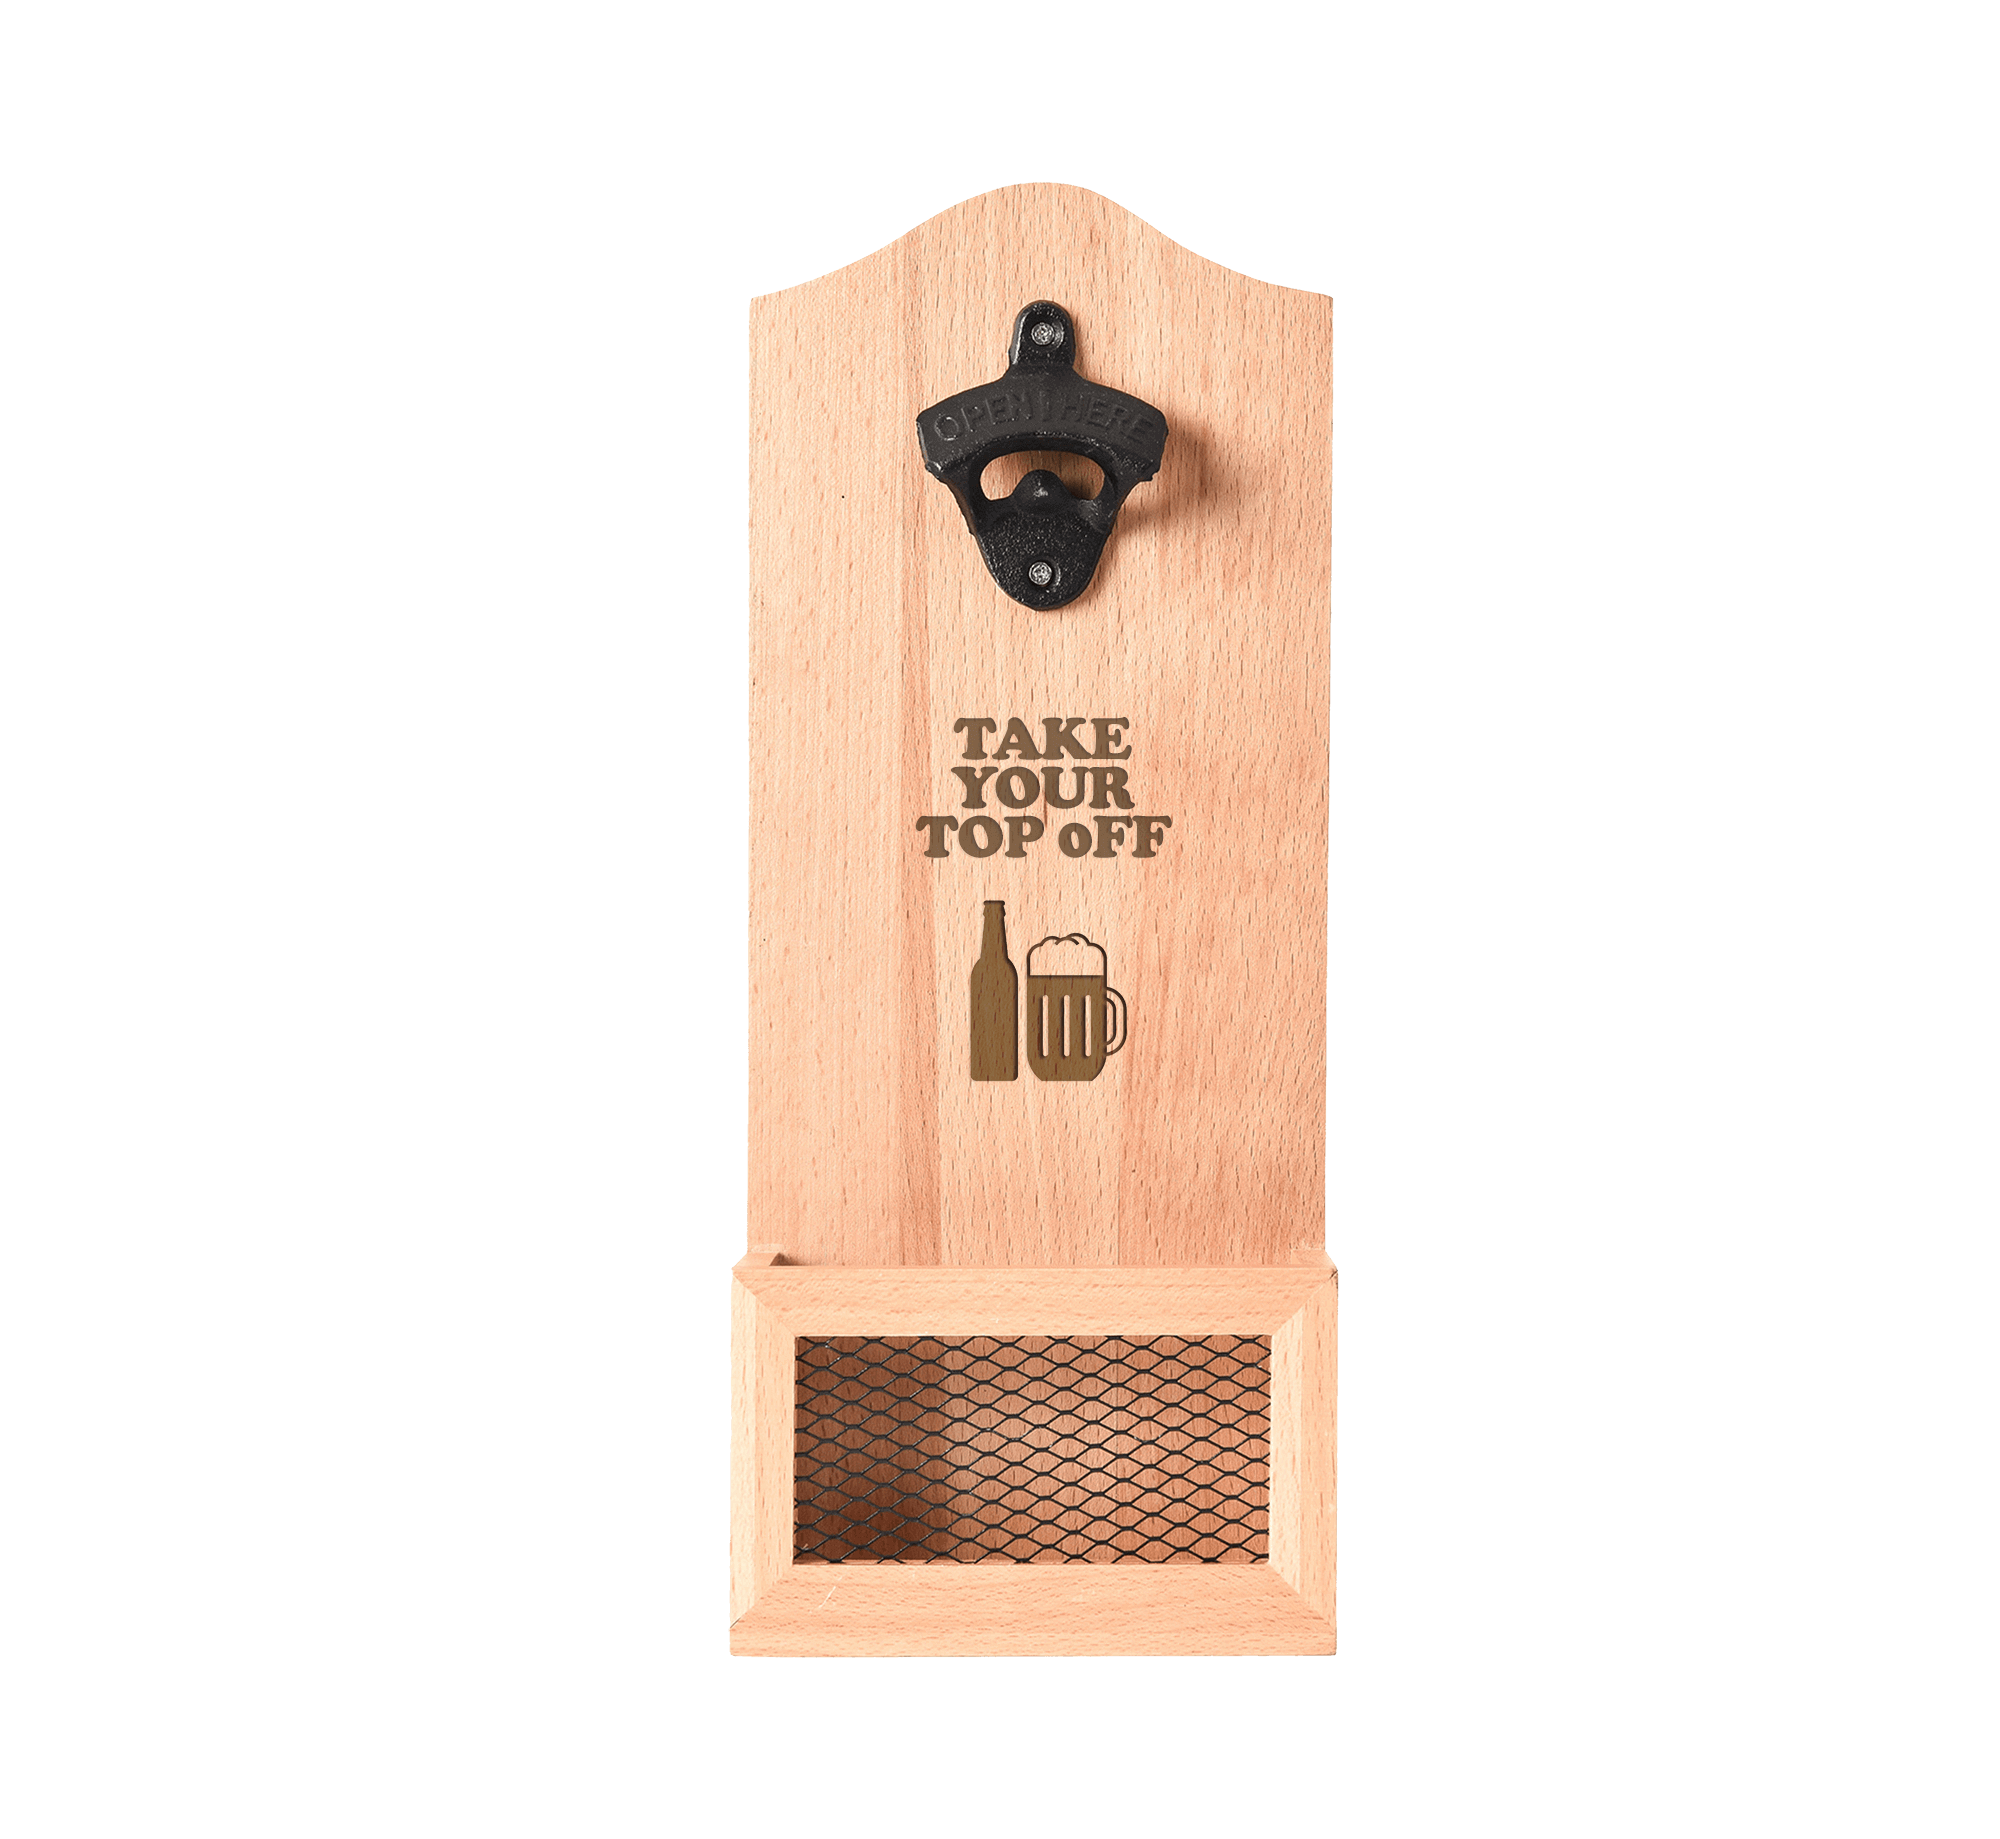 WOODEN WALL MOUNTED BOTTLE OPENER "TAKE YOUR TOP OFF"_TEAM_STUBBY CLUB